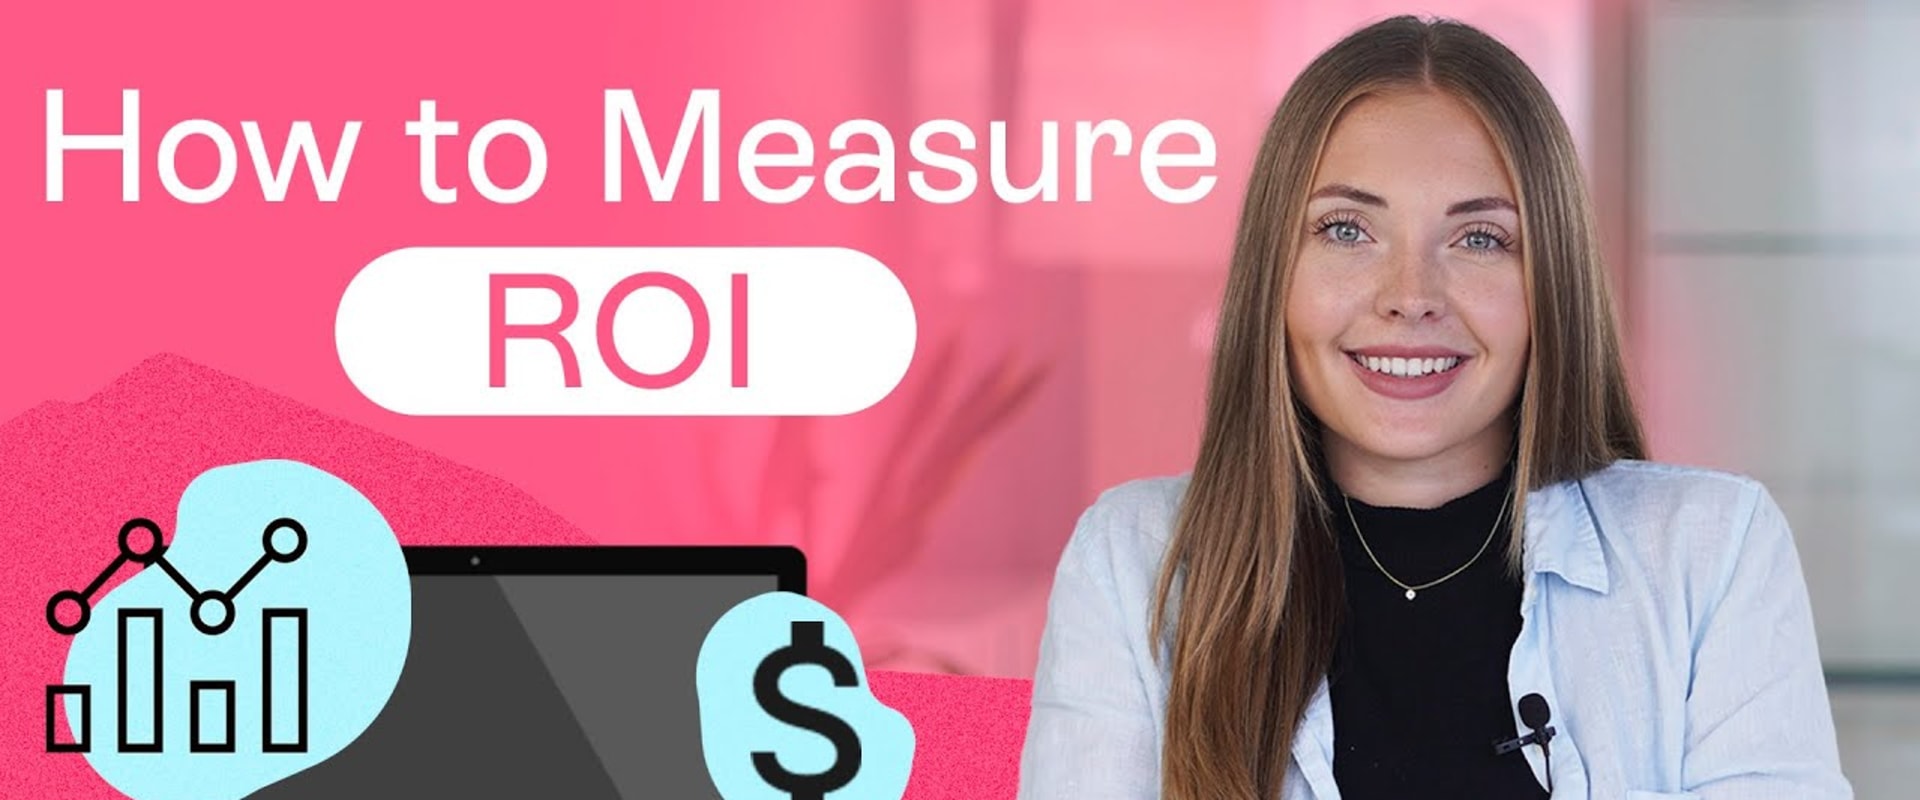 Measuring ROI from Influencers on YouTube